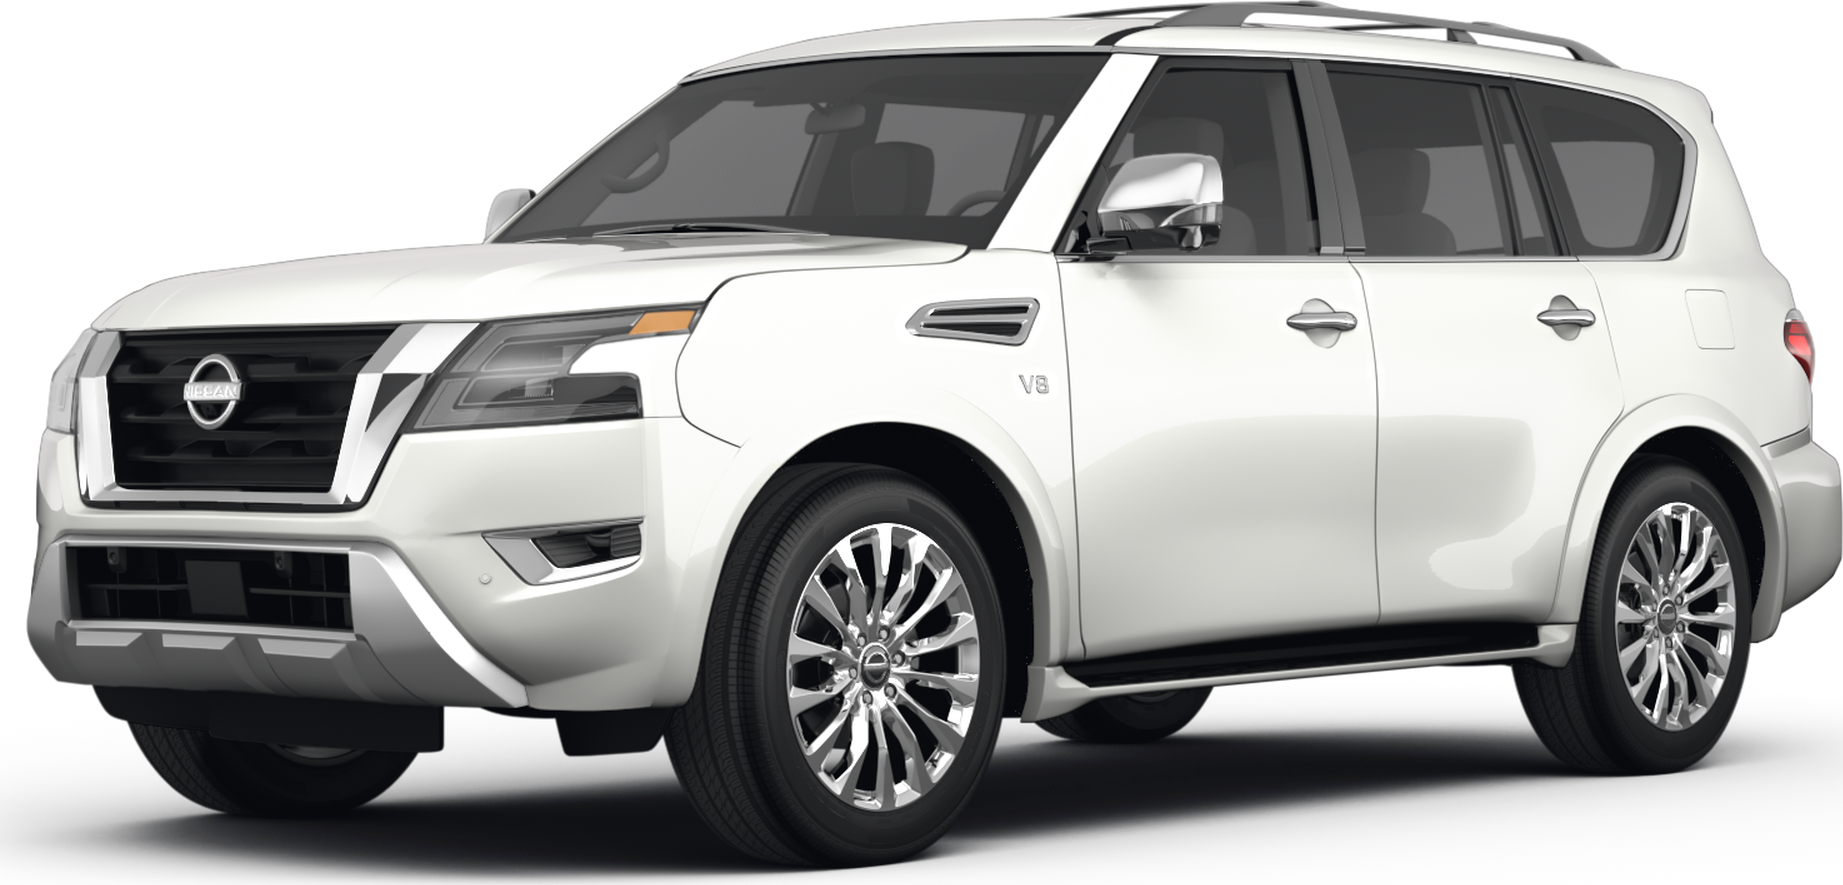 https://file.kelleybluebookimages.com/kbb/base/evox/CP/15130/2021-Nissan-Armada-front_15130_032_1843x885_QAB_cropped.png